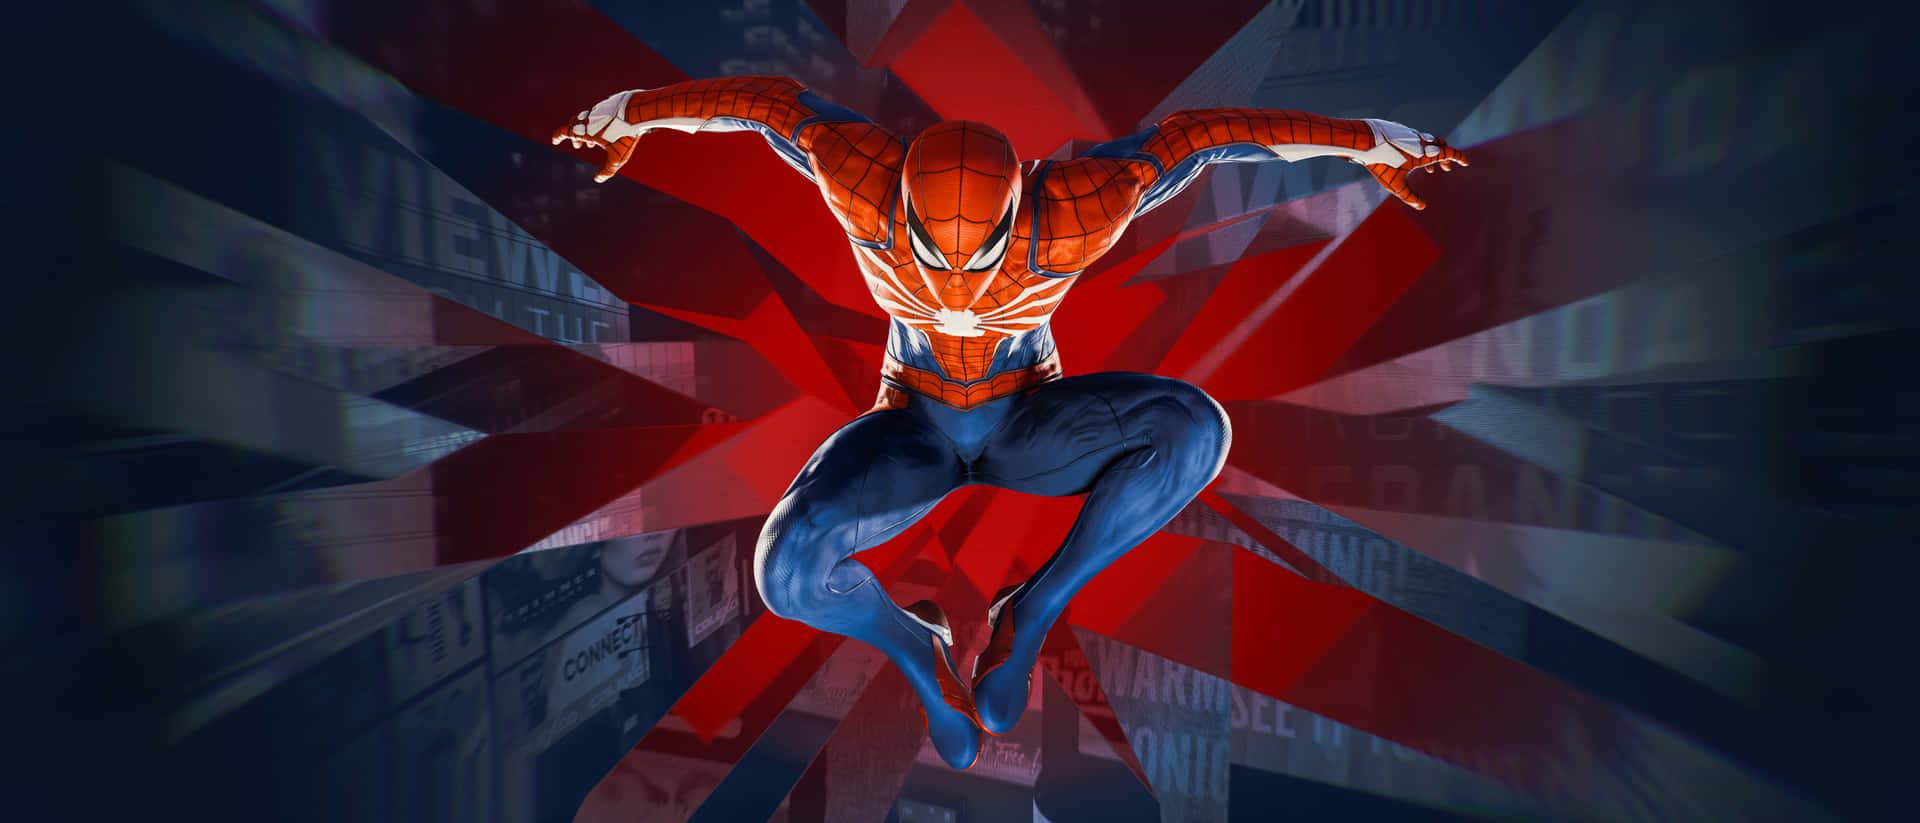 Spider Man being cool and heroic. Wallpaper